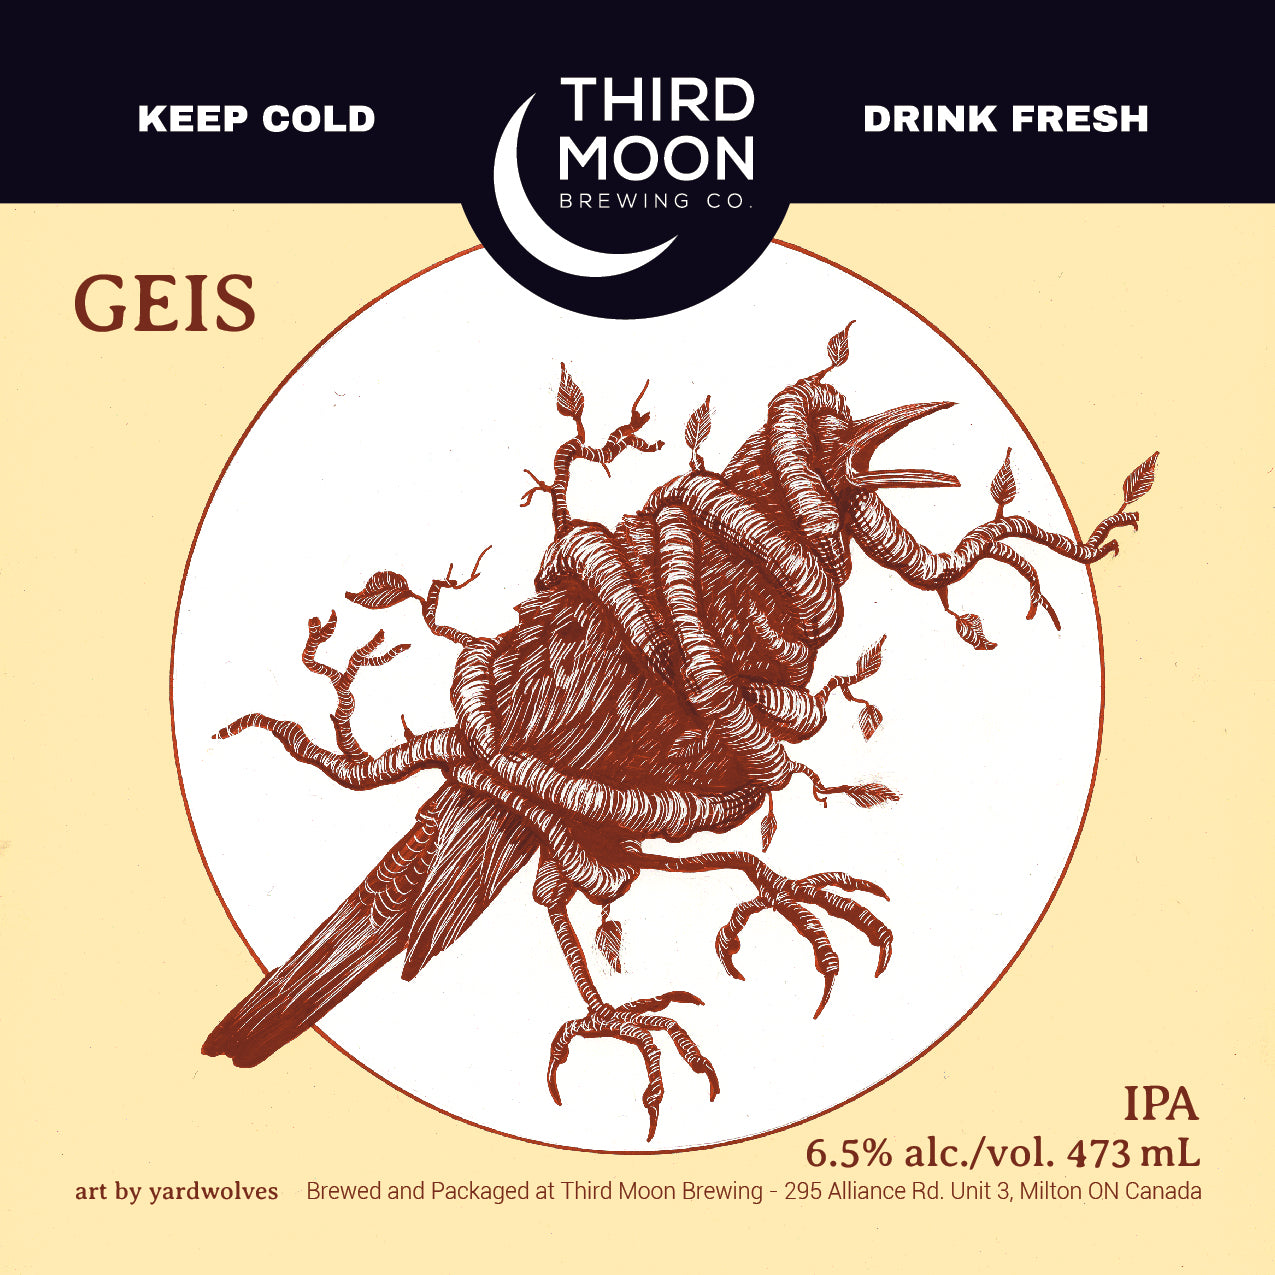 IPA - 4-pk of "Geis" tall cans